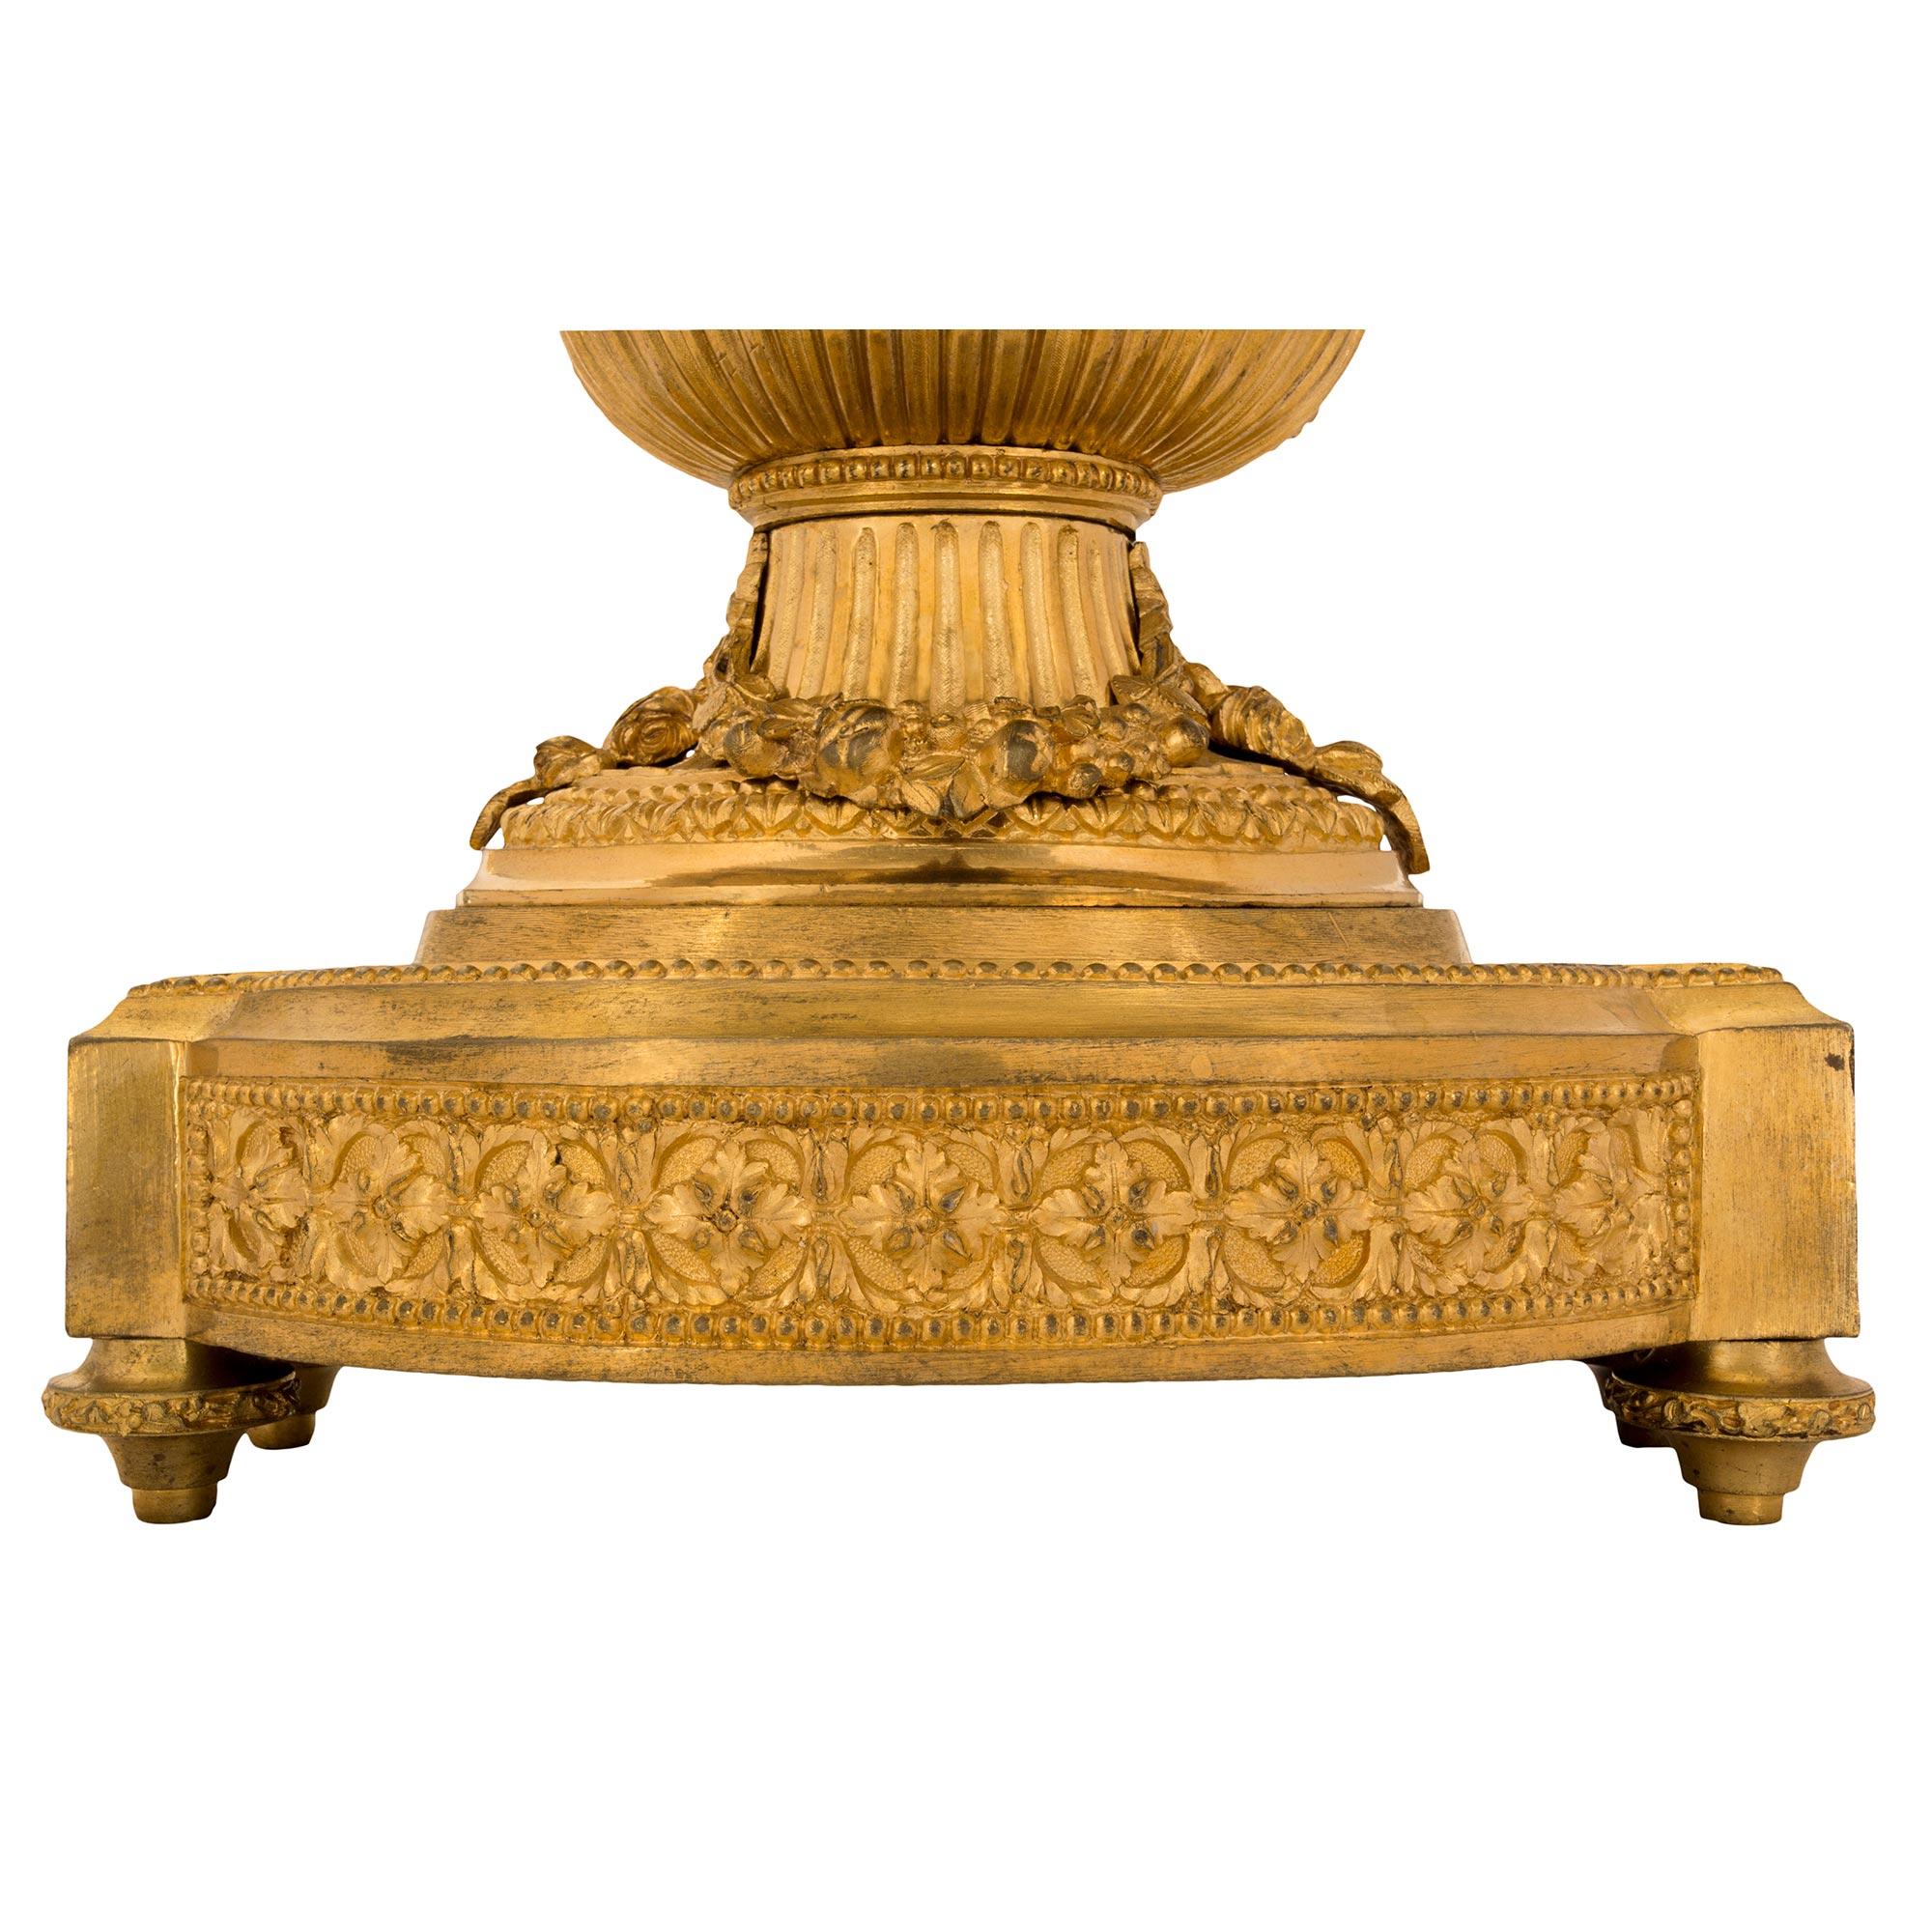 French Early 19th Century Louis XVI Style Ormolu Clock, 'Signed Lepaute Paris' For Sale 4